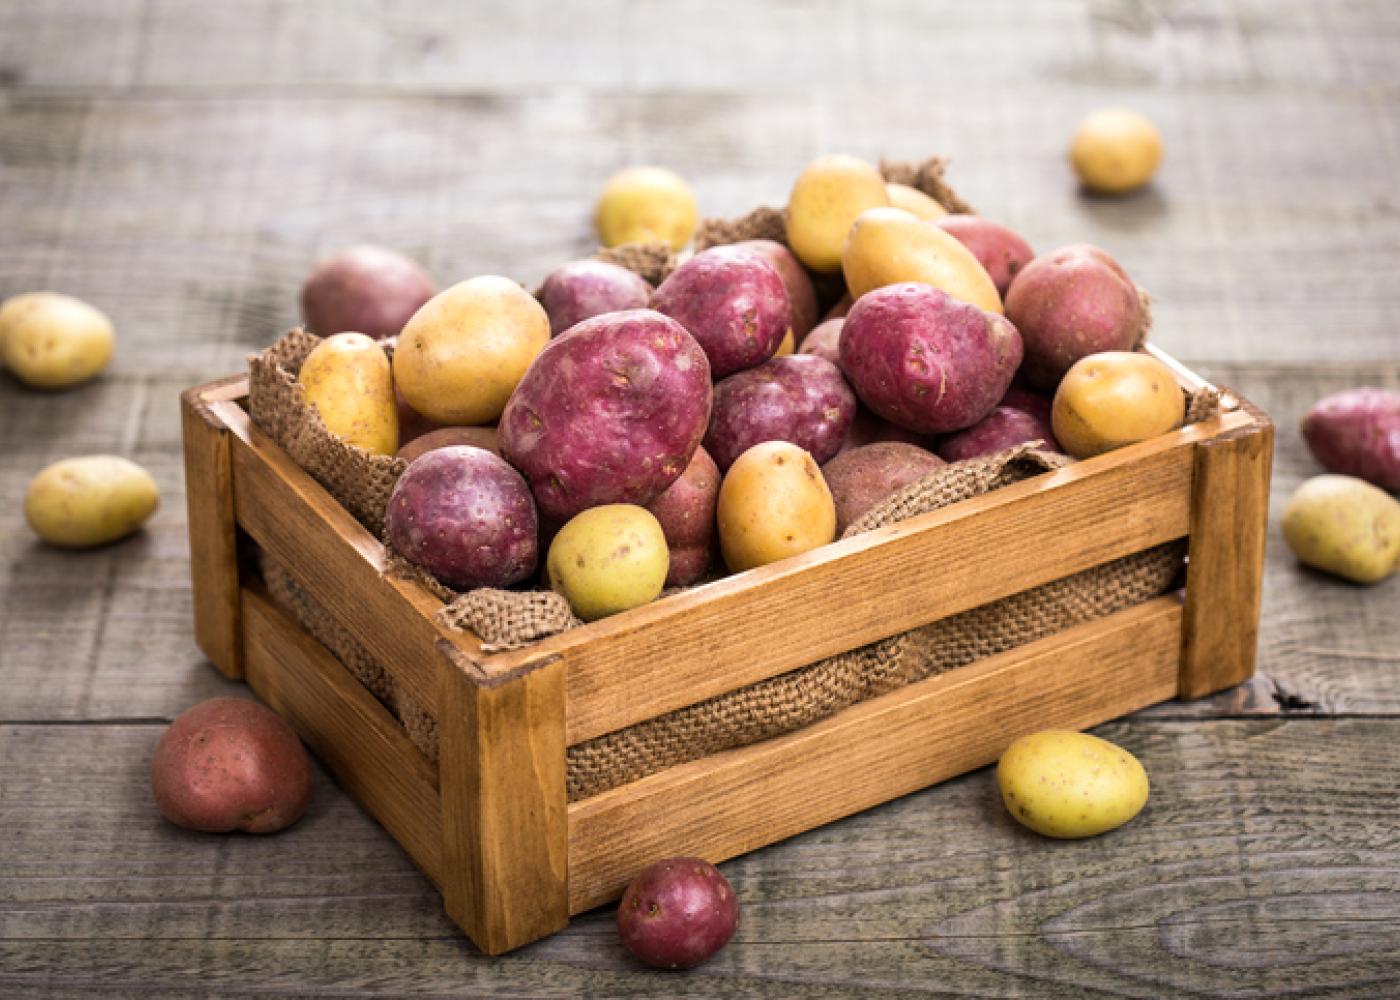 Red and white potatoes in a crate